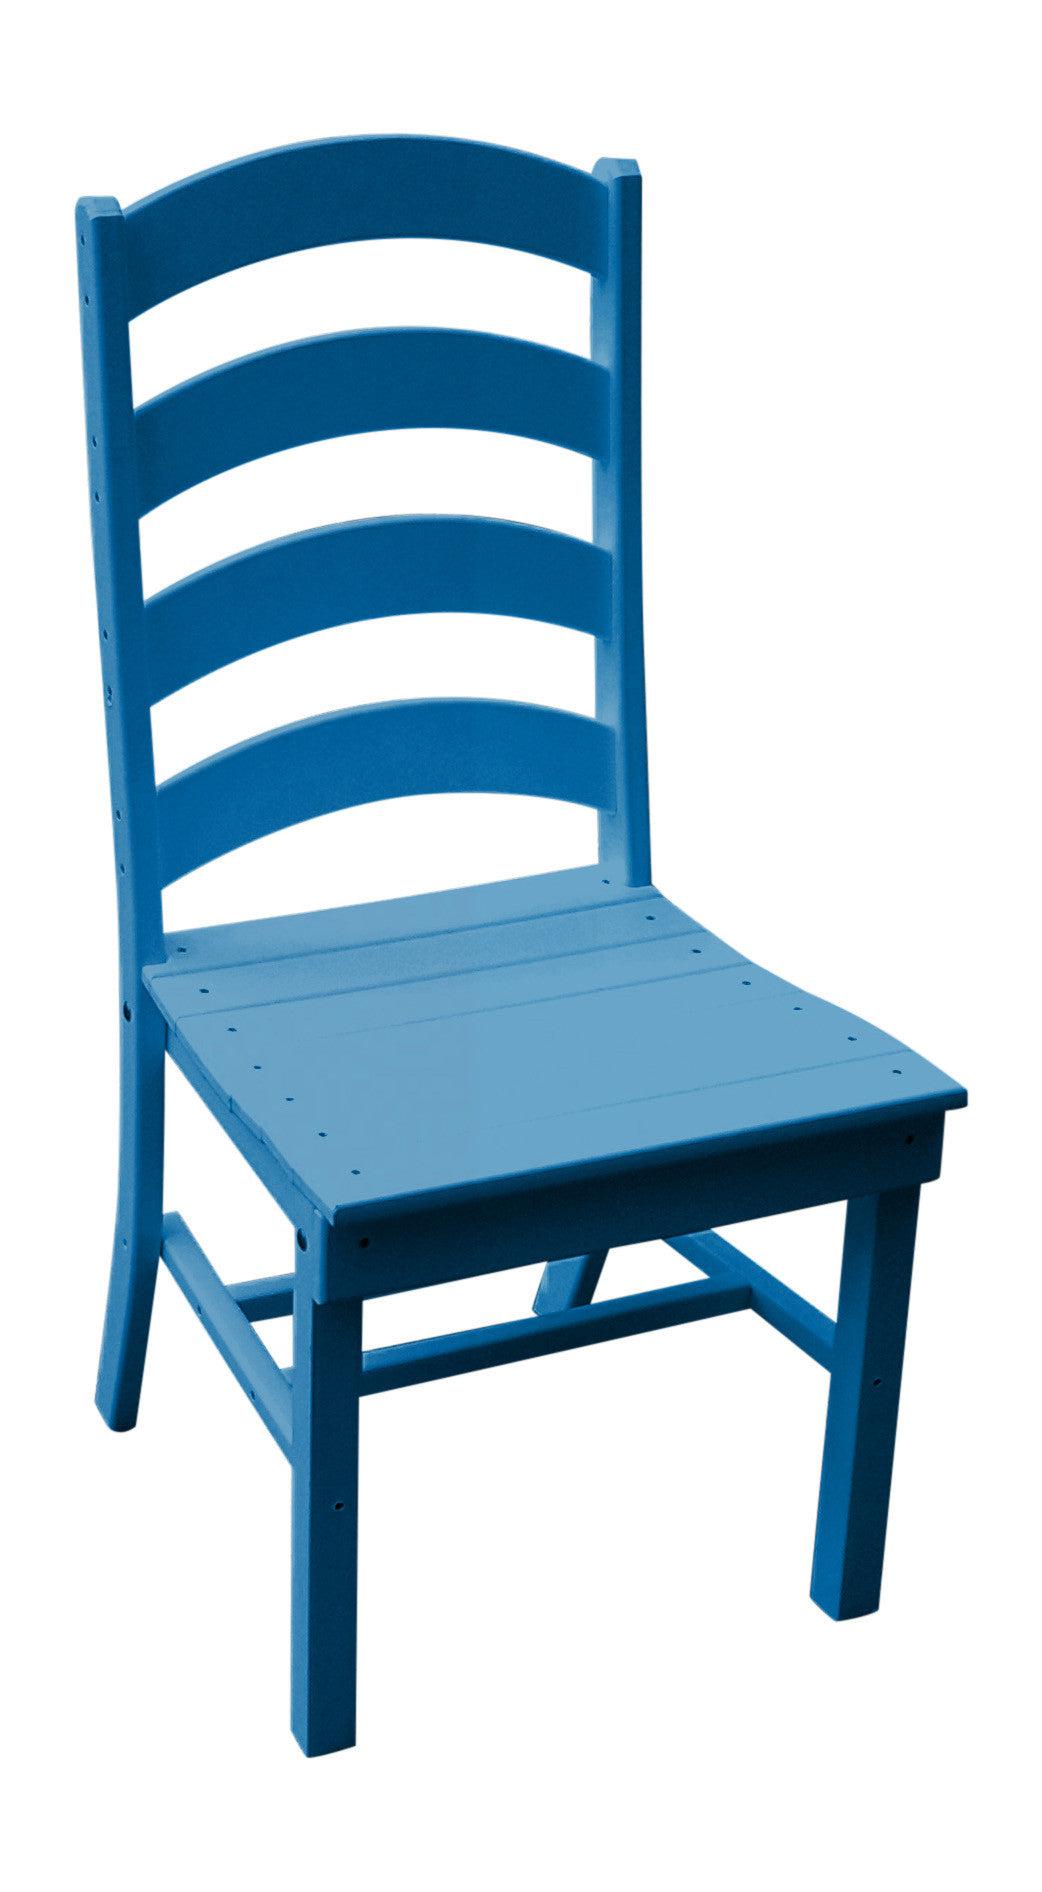 A&L Furniture Company Recycled Plastic Ladderback Dining Chair - Blue